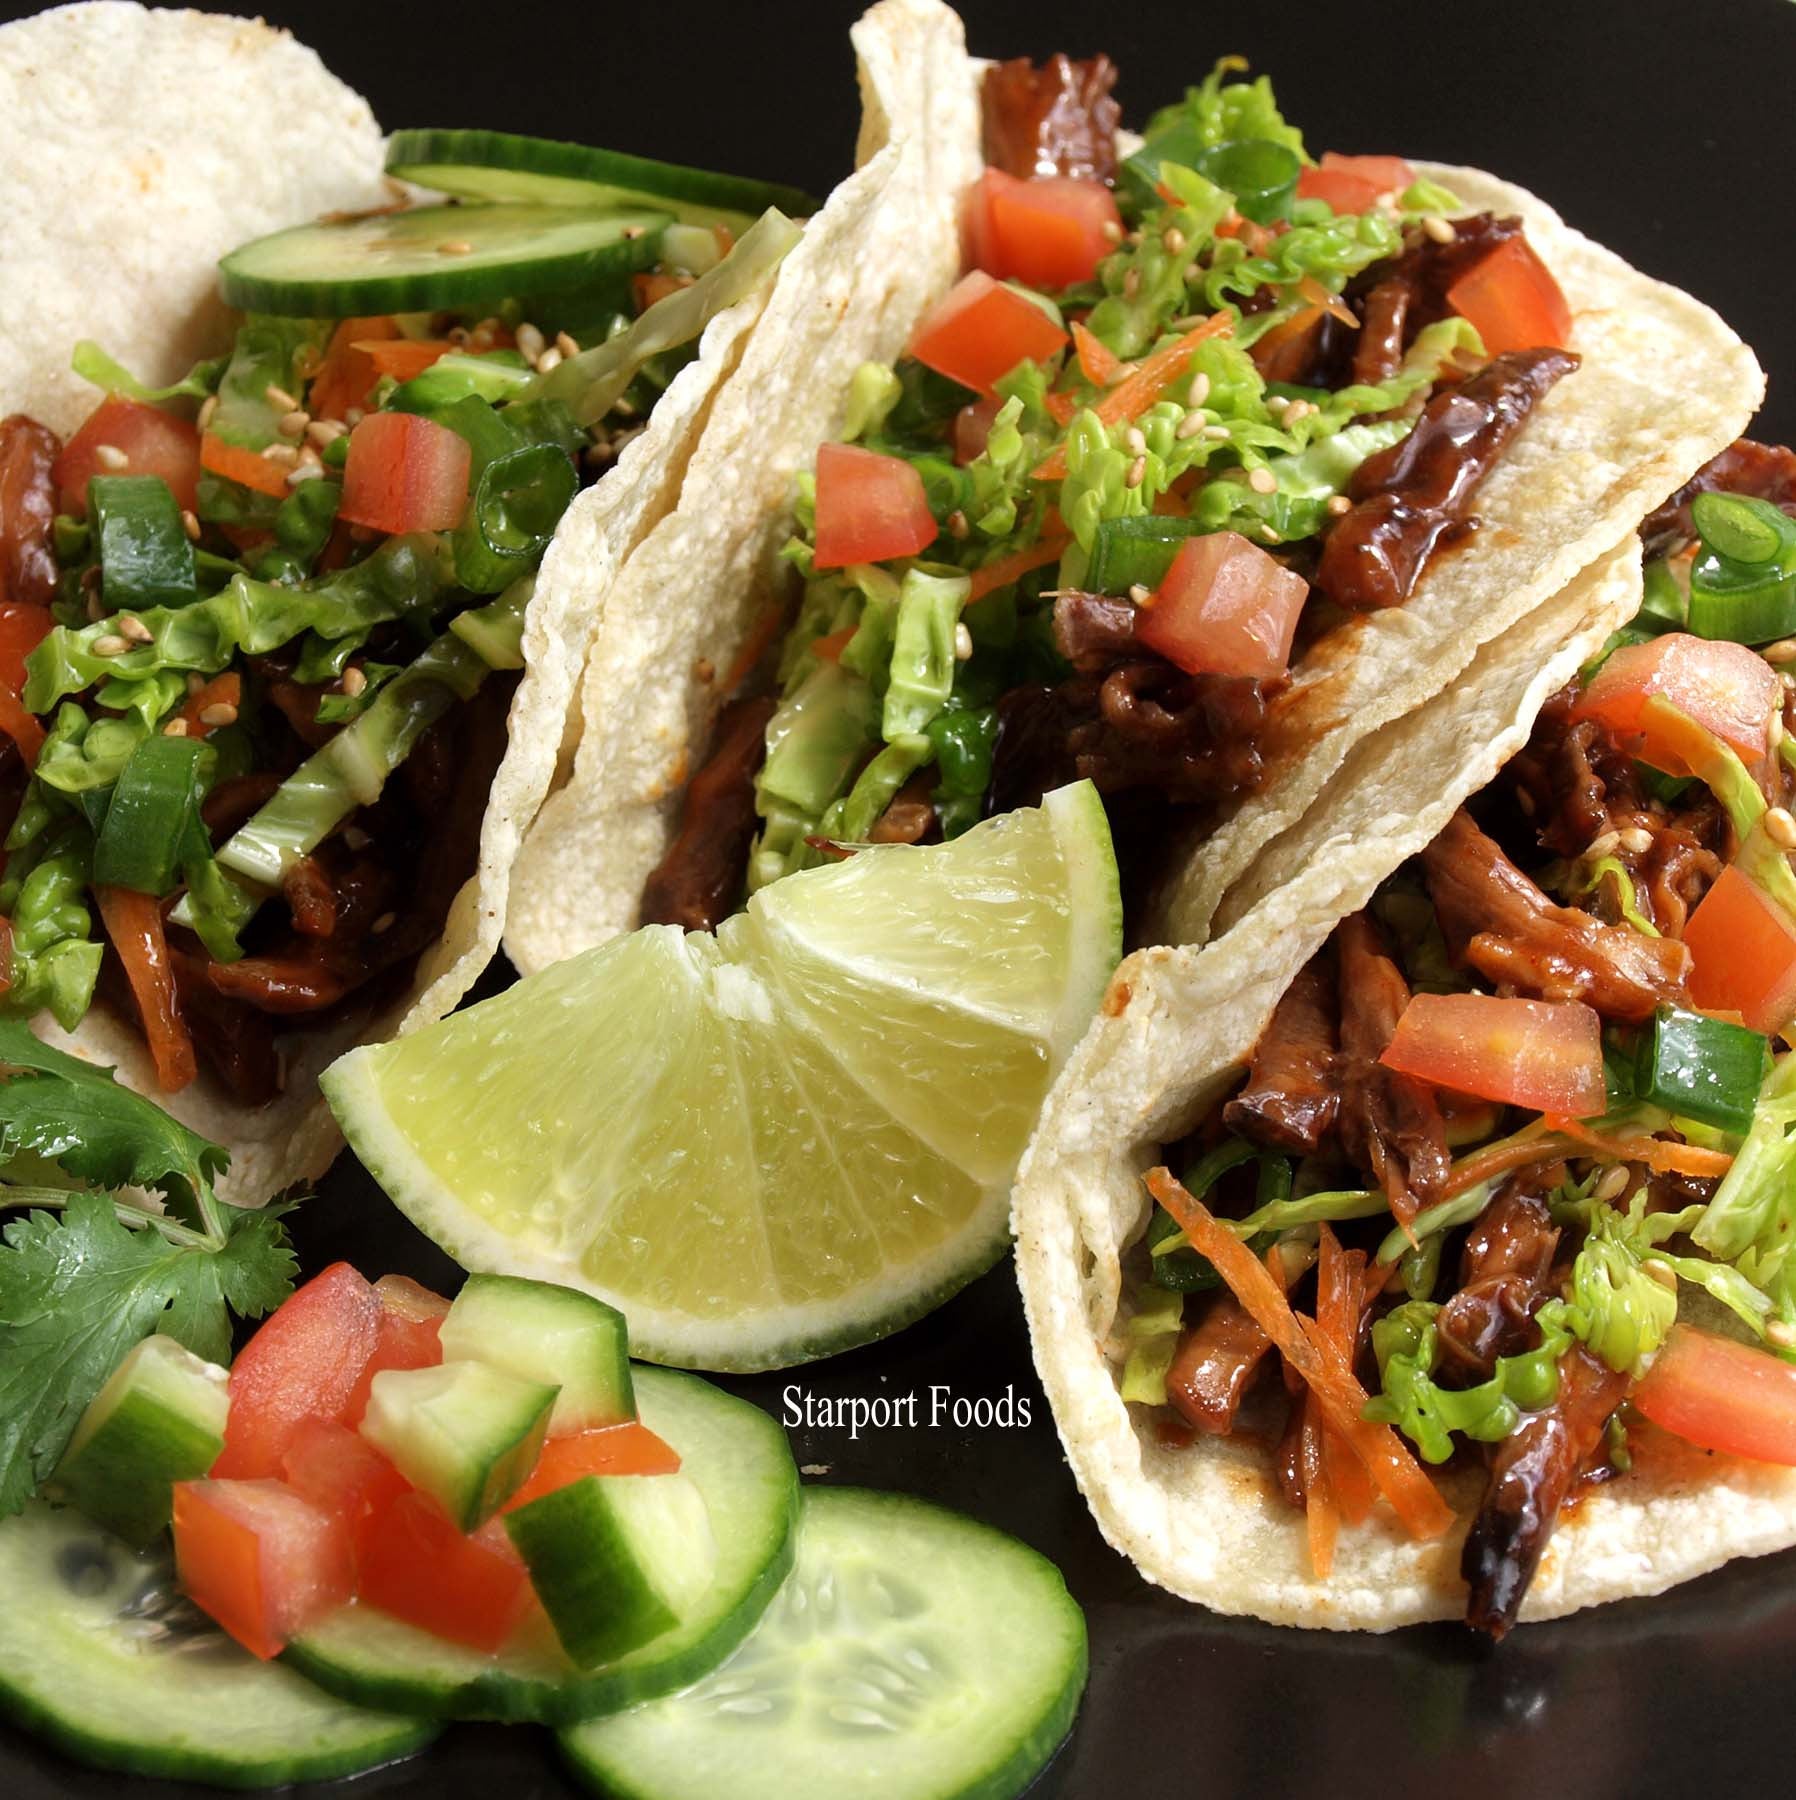 Korean Taco Recipe - Holy cow these are delicious fusion tacos!